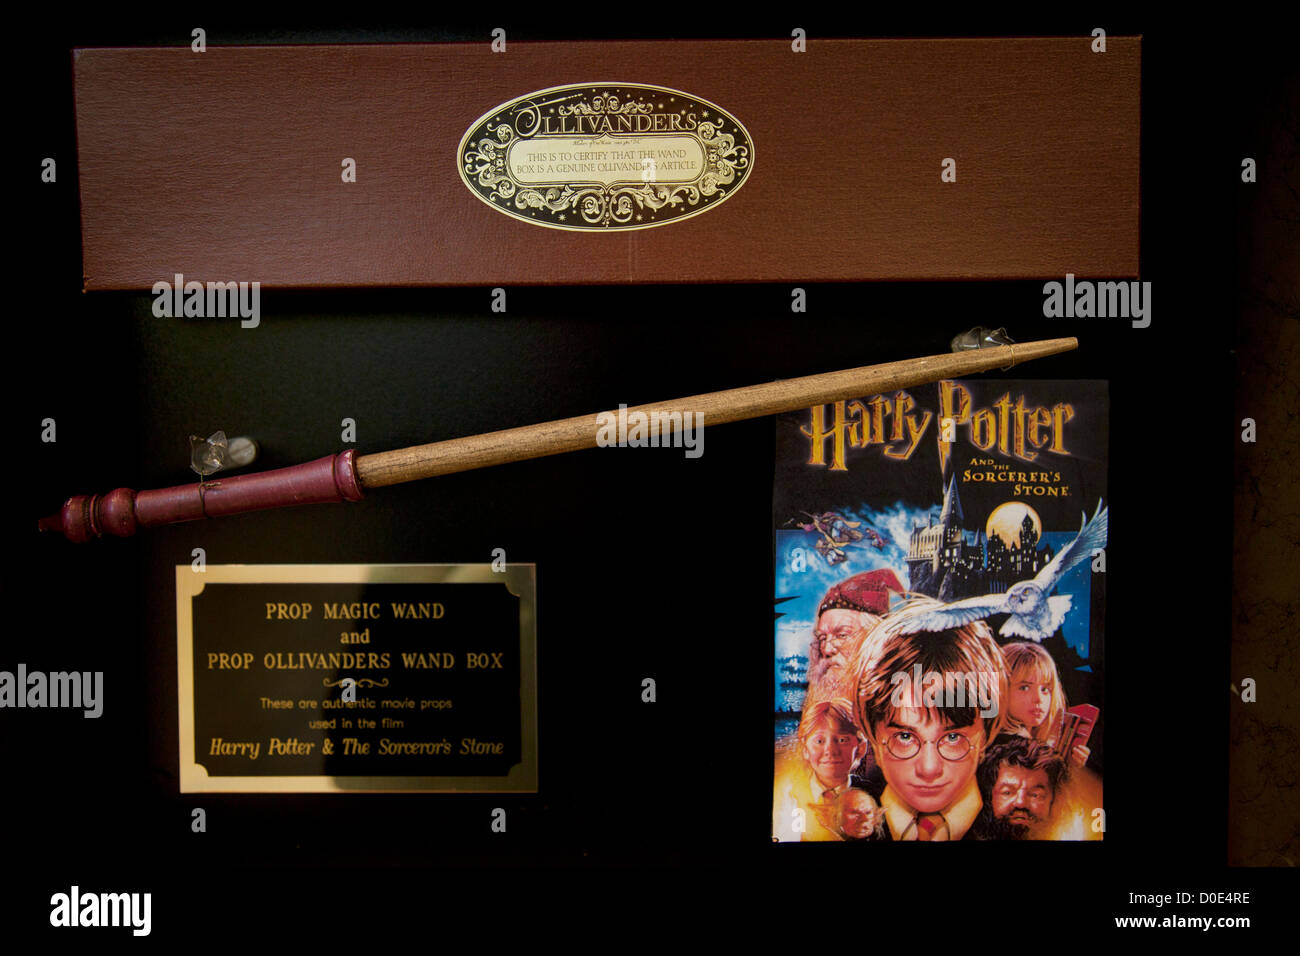 London, UK. Friday 23rd November 2012. Christies auction house showcasing memorabilia from every decade of the past century of popular culture from the industries of film and music. Harry Potter magicians wand as used in Harry Potter & the Sorcerers Stone. Stock Photo